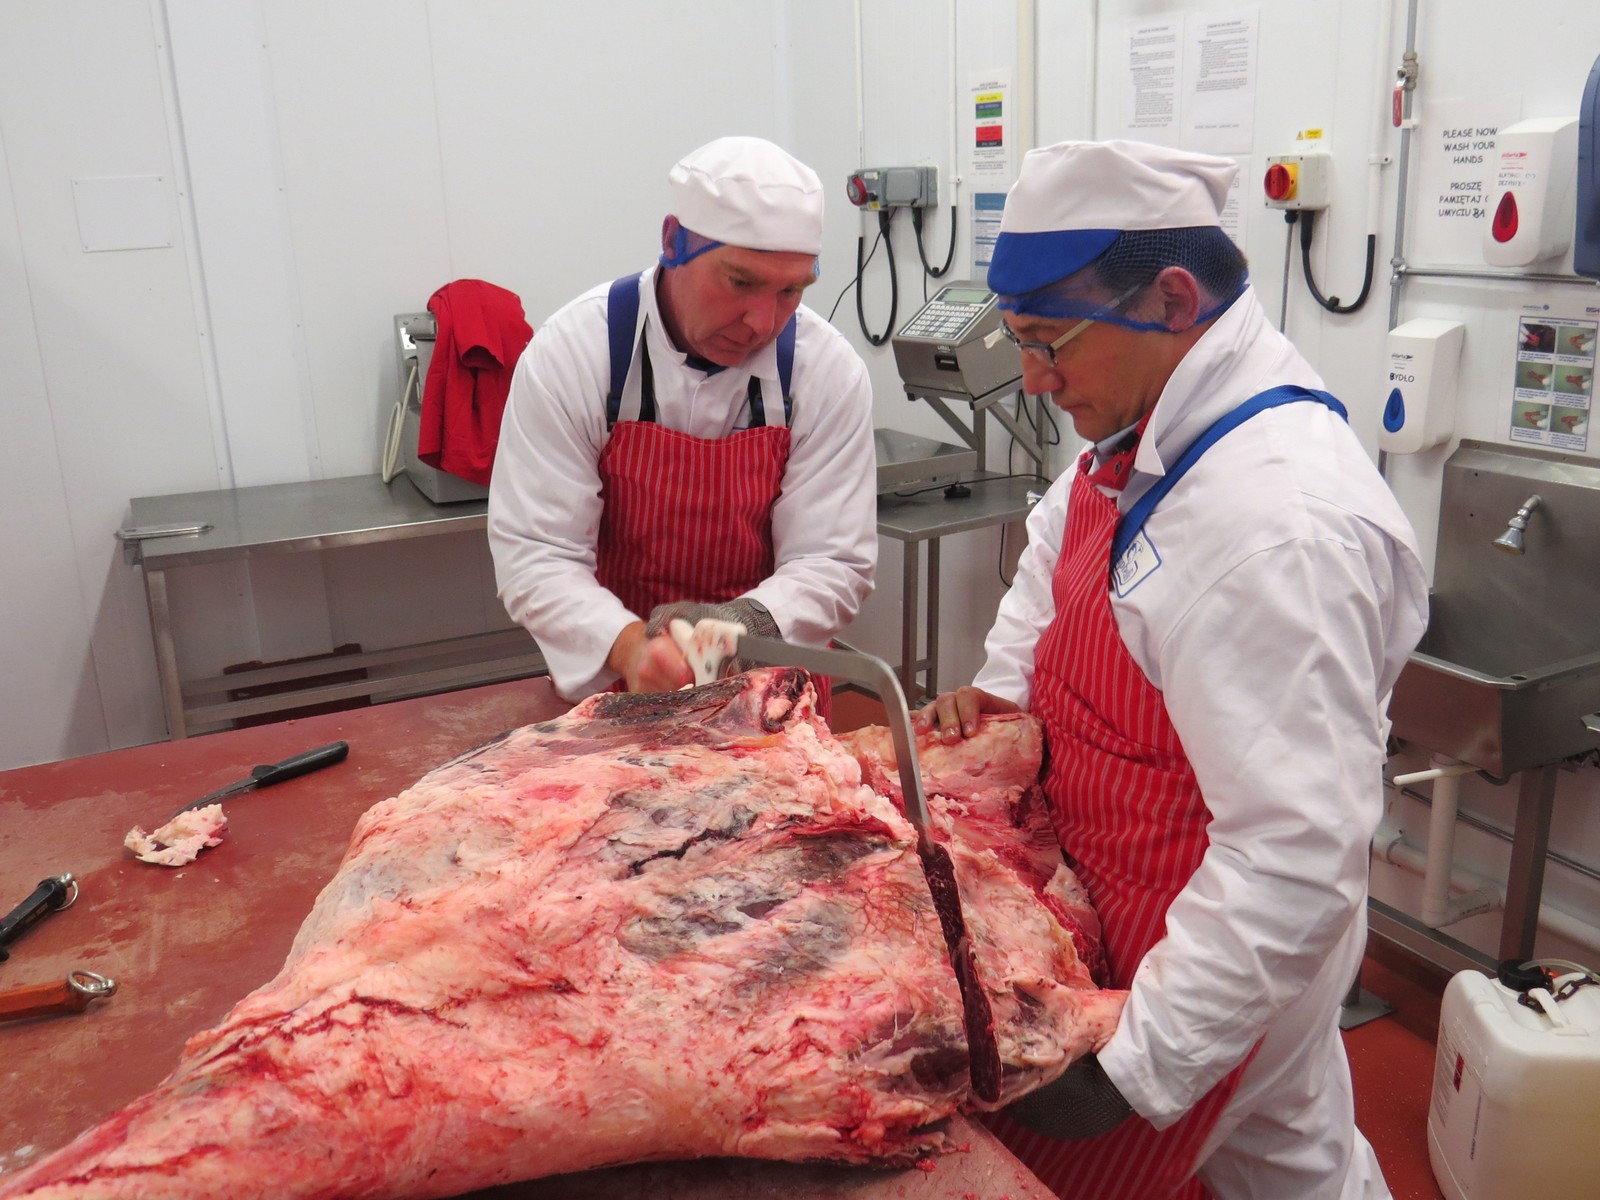 Butchery can be hard physical work.